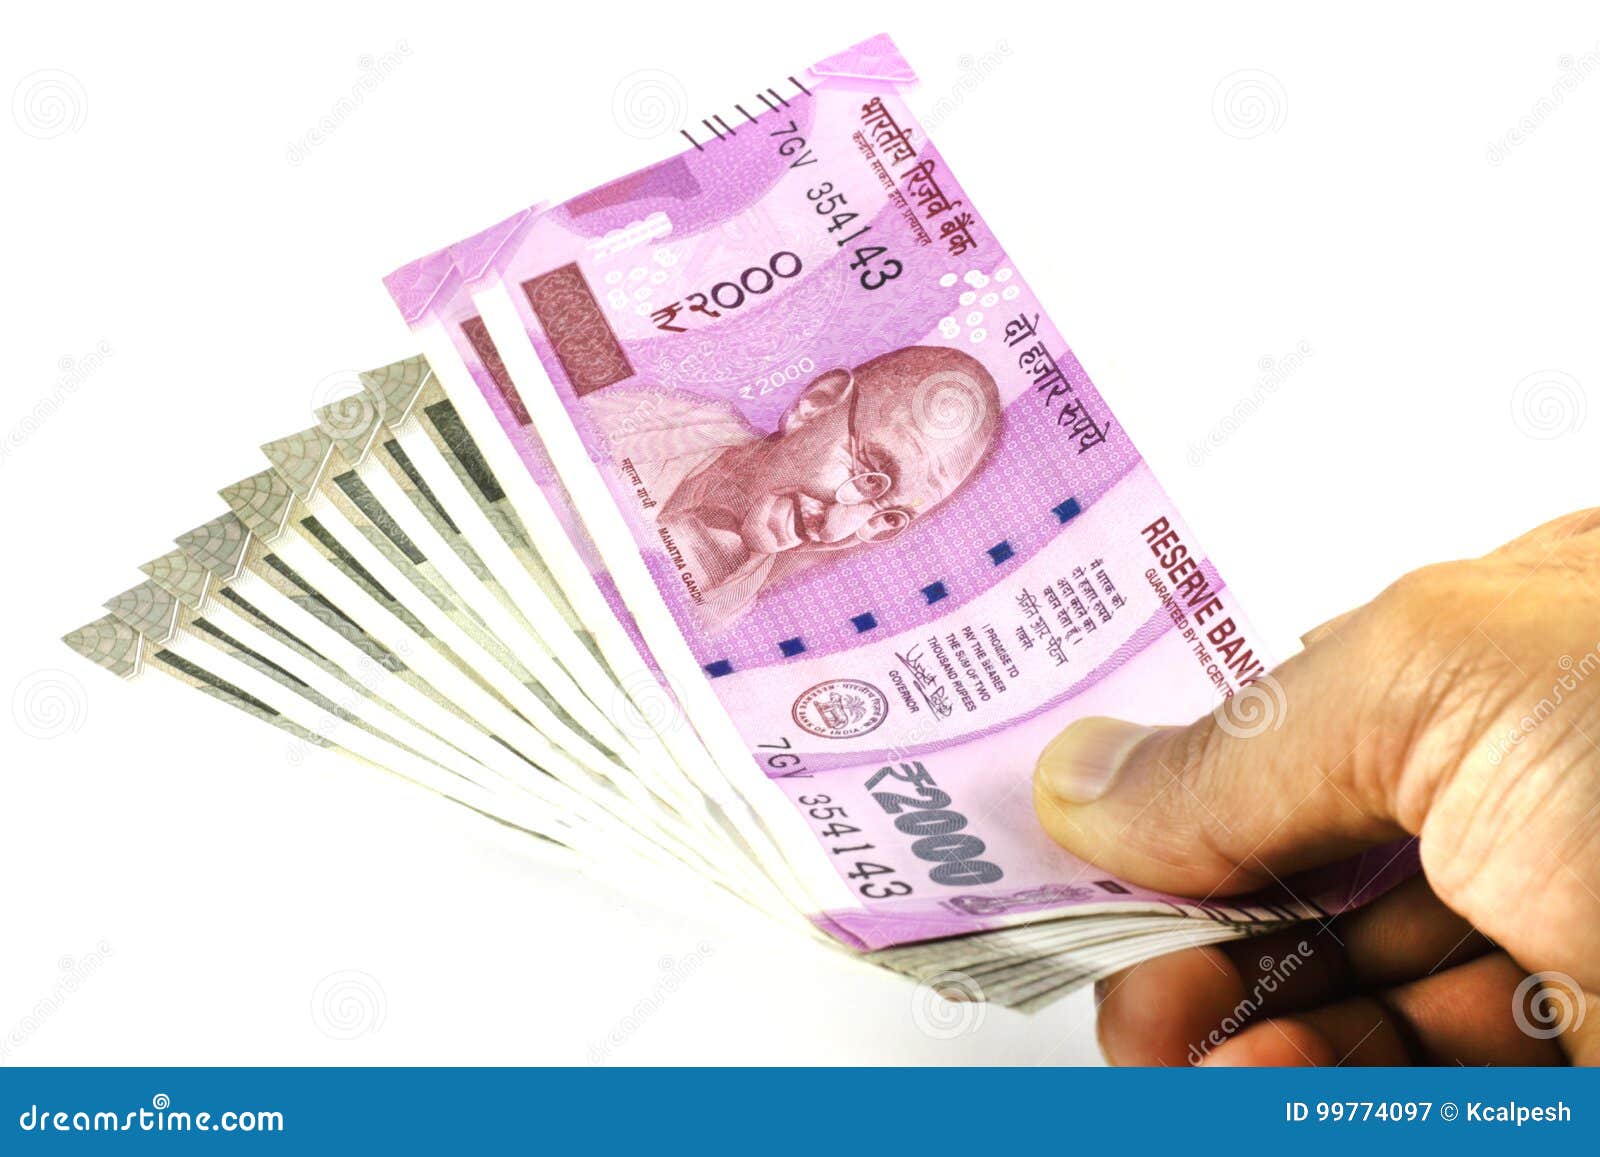 Indian Currency New Notes Held in Hand. Indian Money in Hand Stock ...